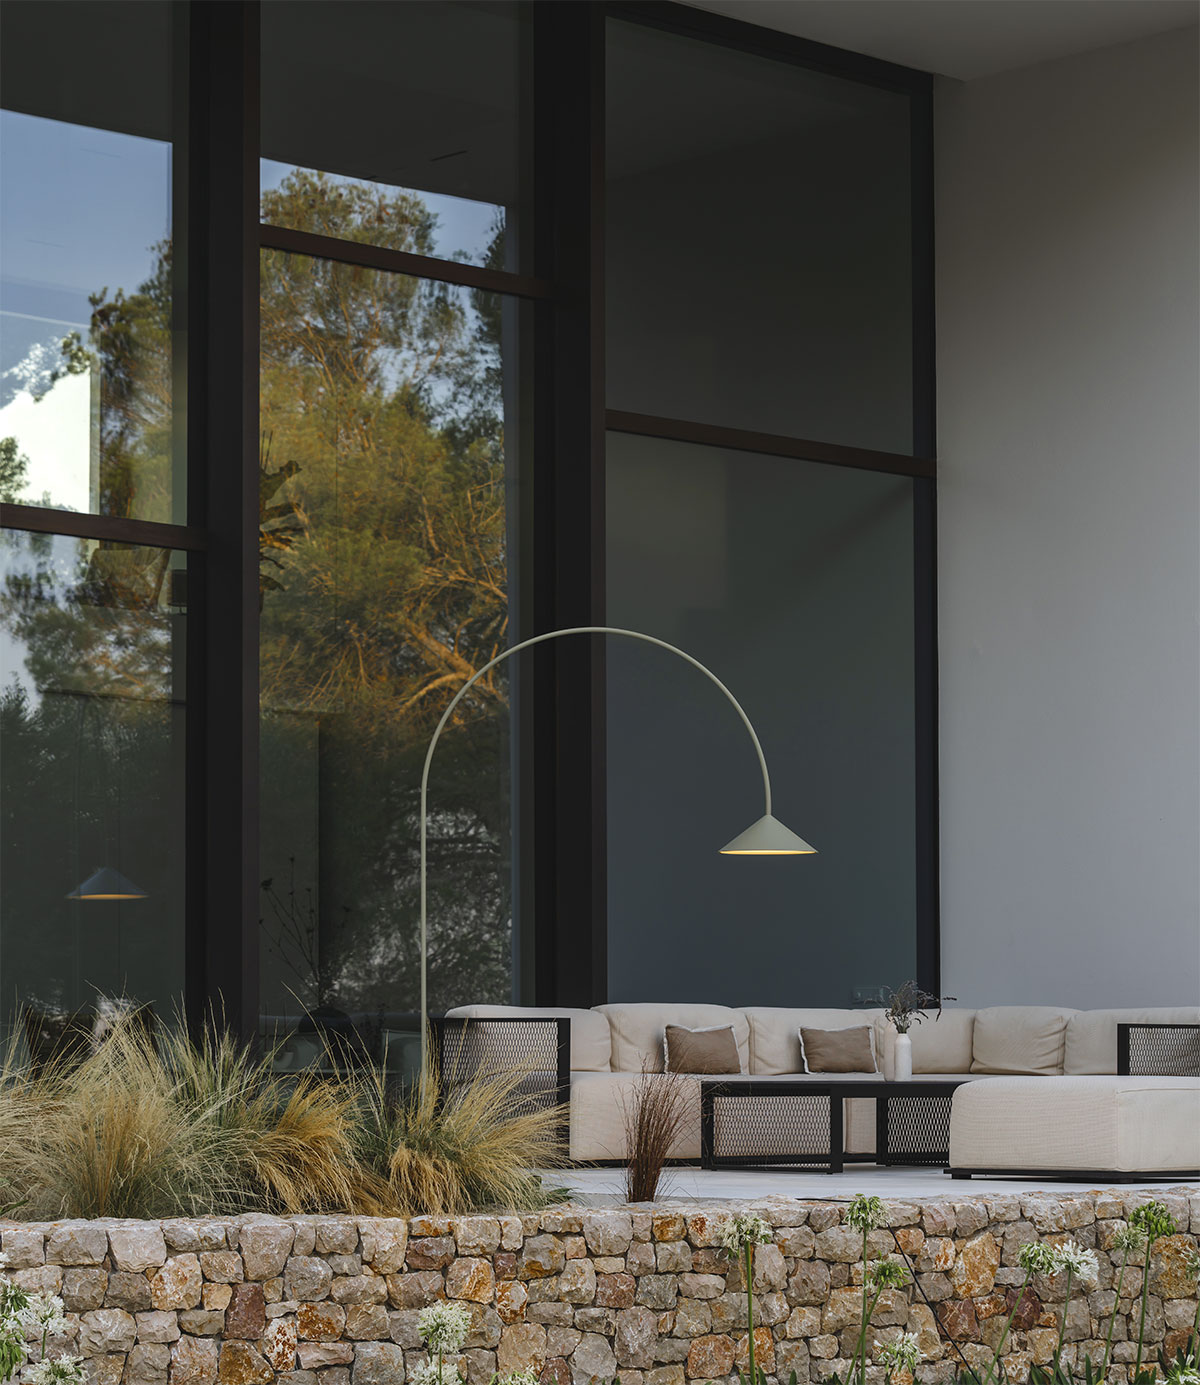 Vibia The Edit - Outdoor Living Spaces - Out